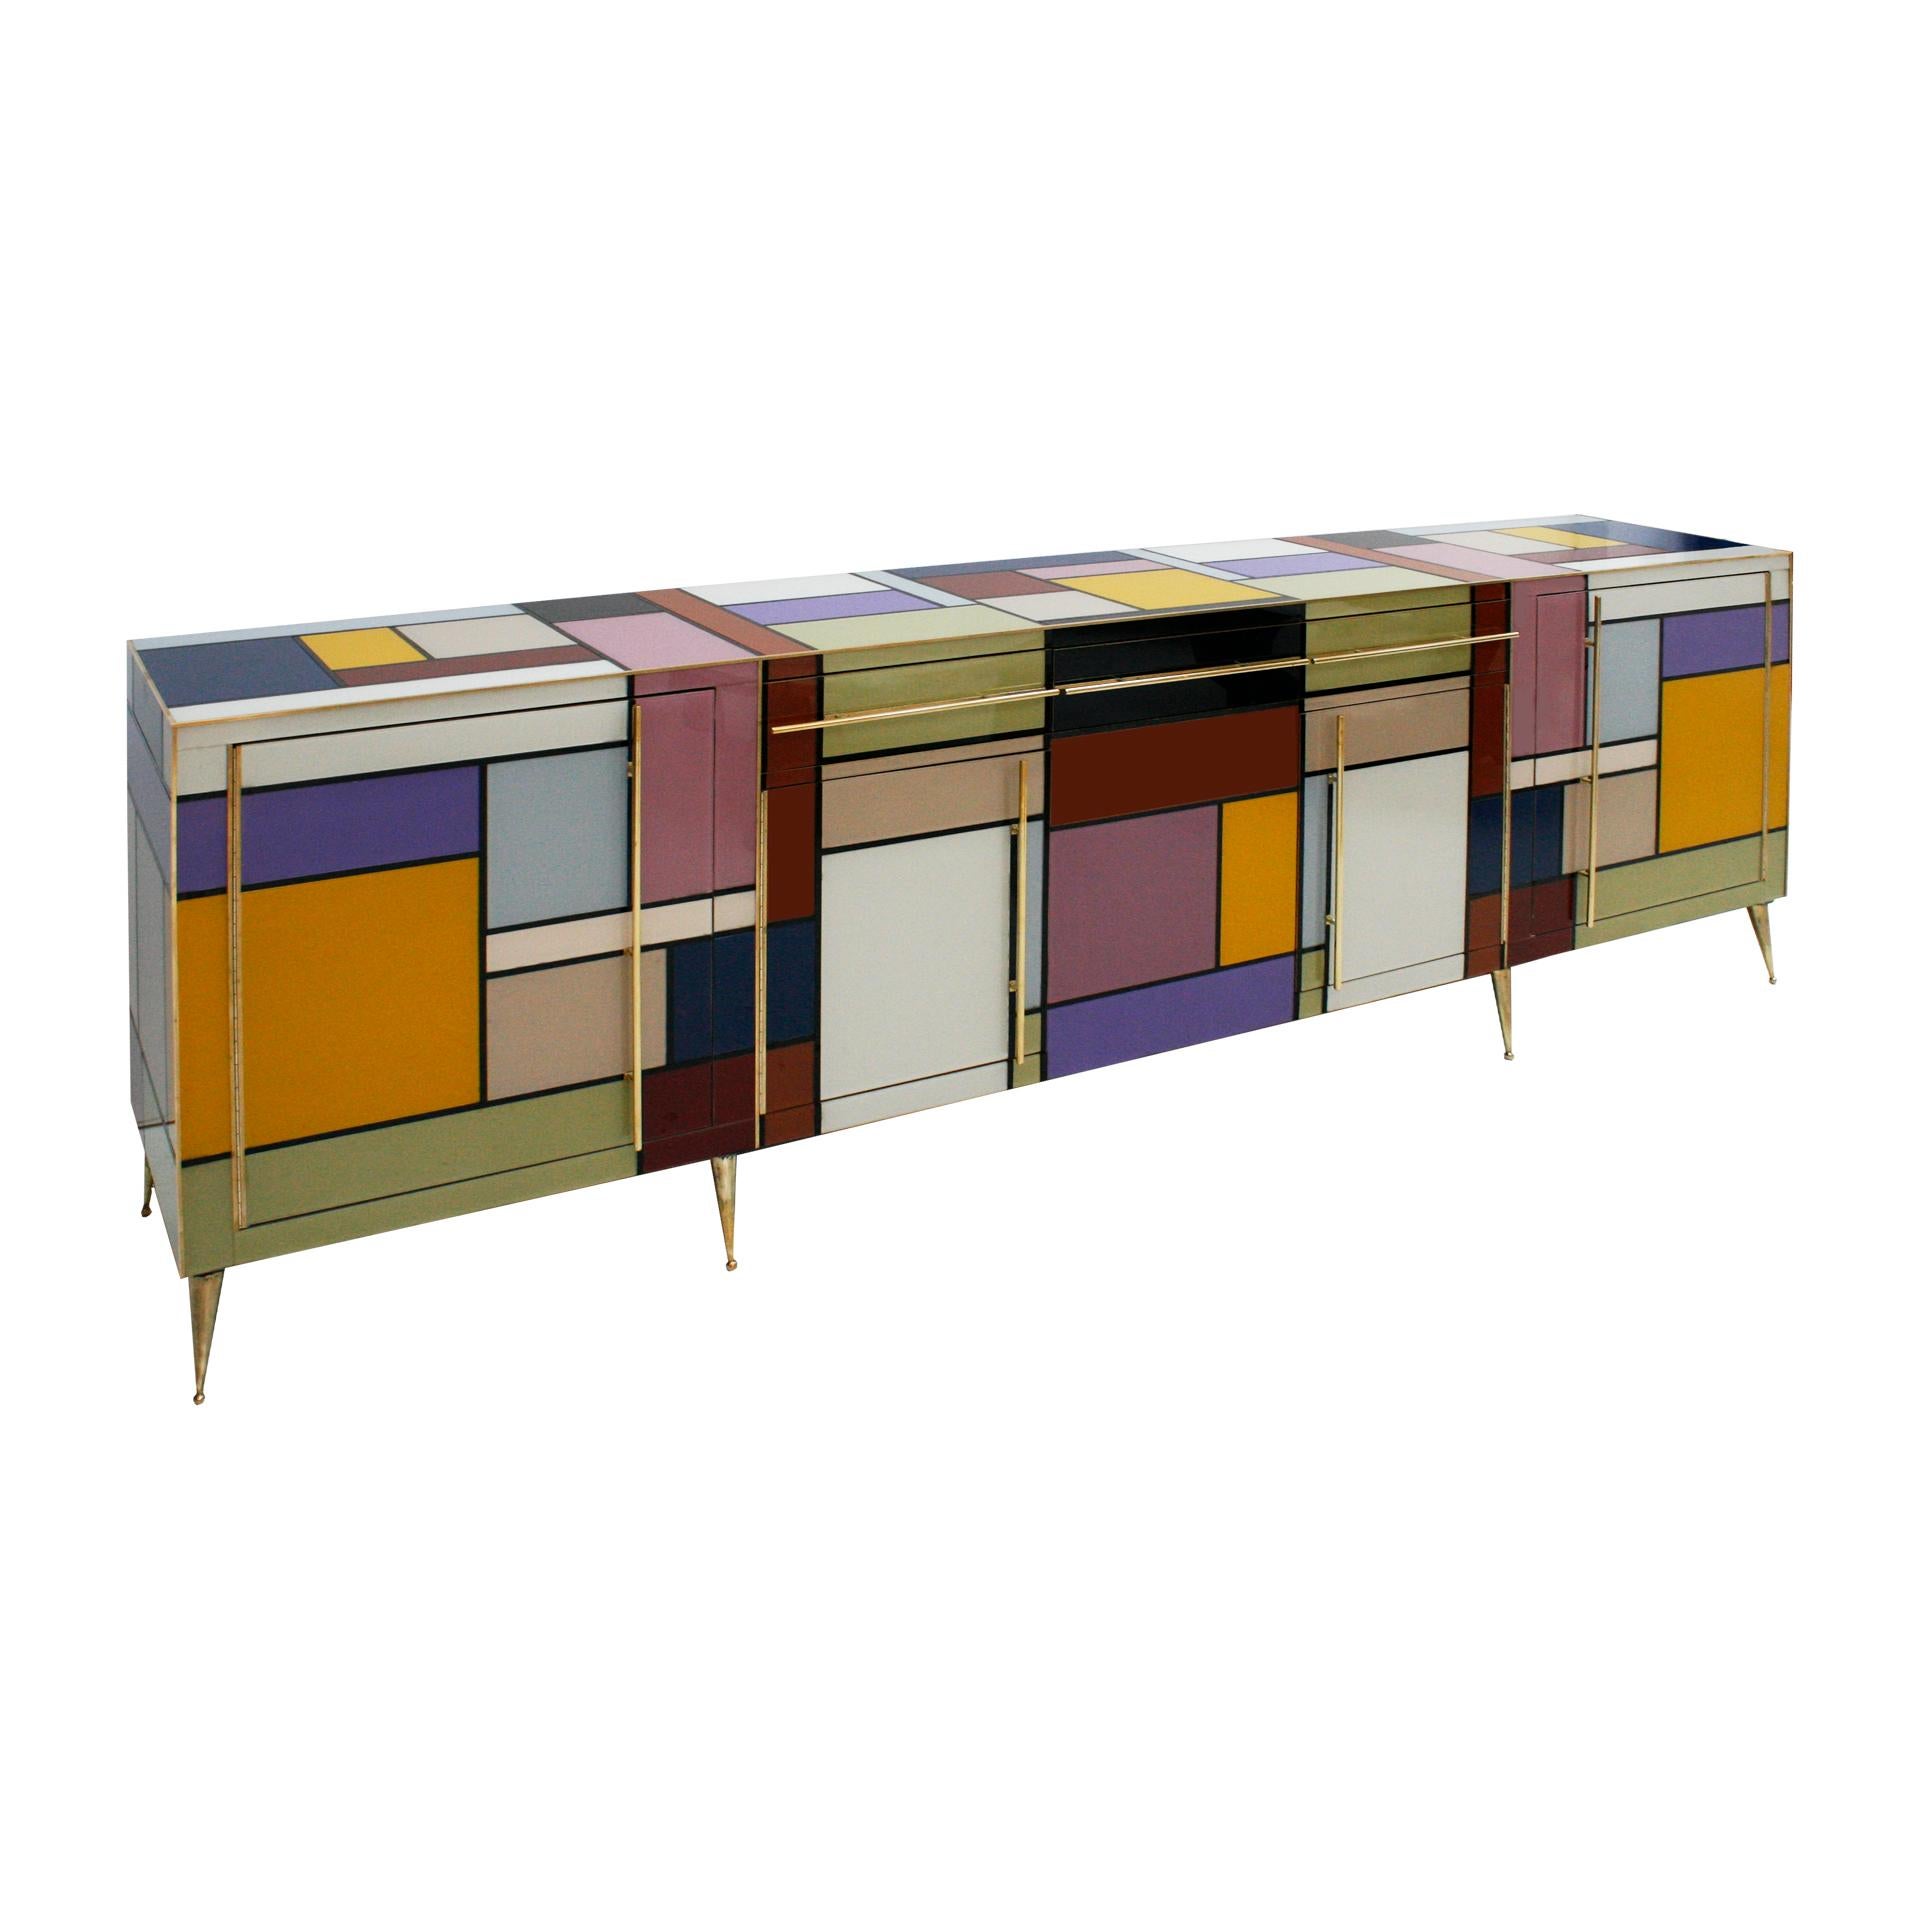 Sideborad comoposed of 3 drawers and 4 doors with original 1950s solid wood sturcture covered in colored glass. Handles, profiles and legs made of brass. Italy.

Production can last between 5 and 6 weeks.

Our main target is customer satisfaction,